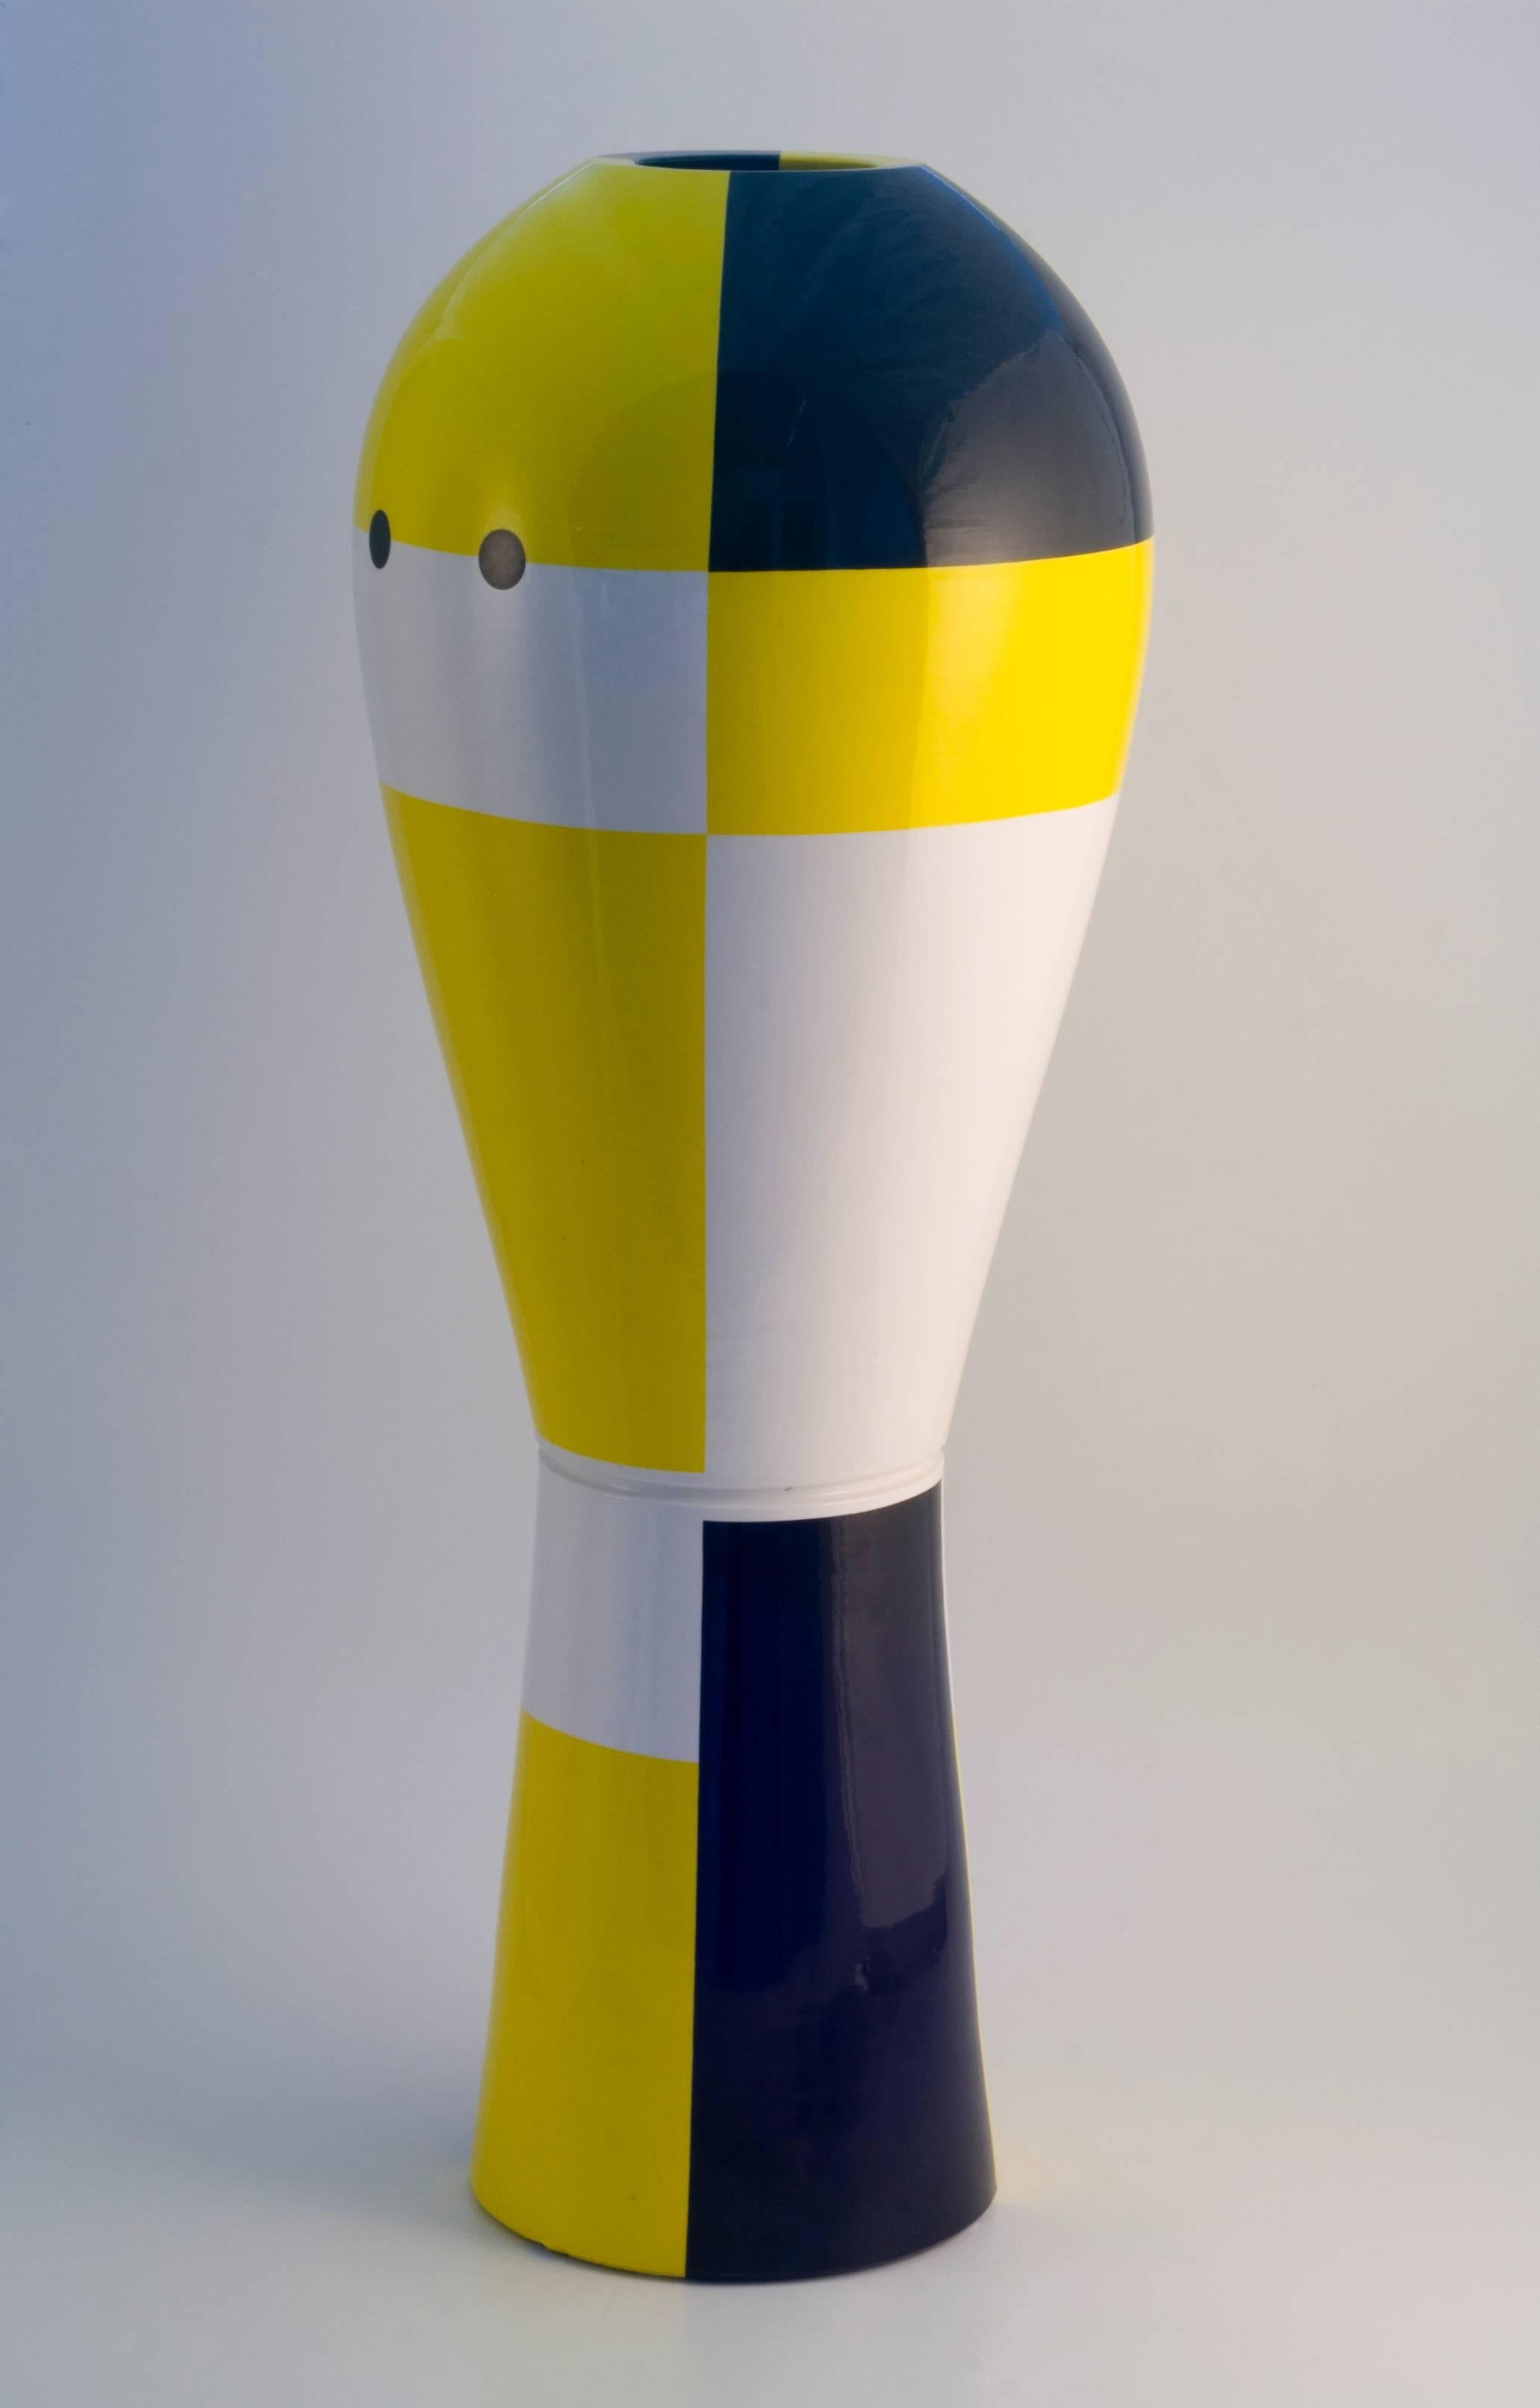 Ceramic vase model B, ABC collection, designed by Alessandro Mendini and produced by Superego Editions.
99 pieces limited edition. Signed and numbered.

Biography
Alessandro Mendini was born in Milan in 1931. After a long experience with Nizzoli